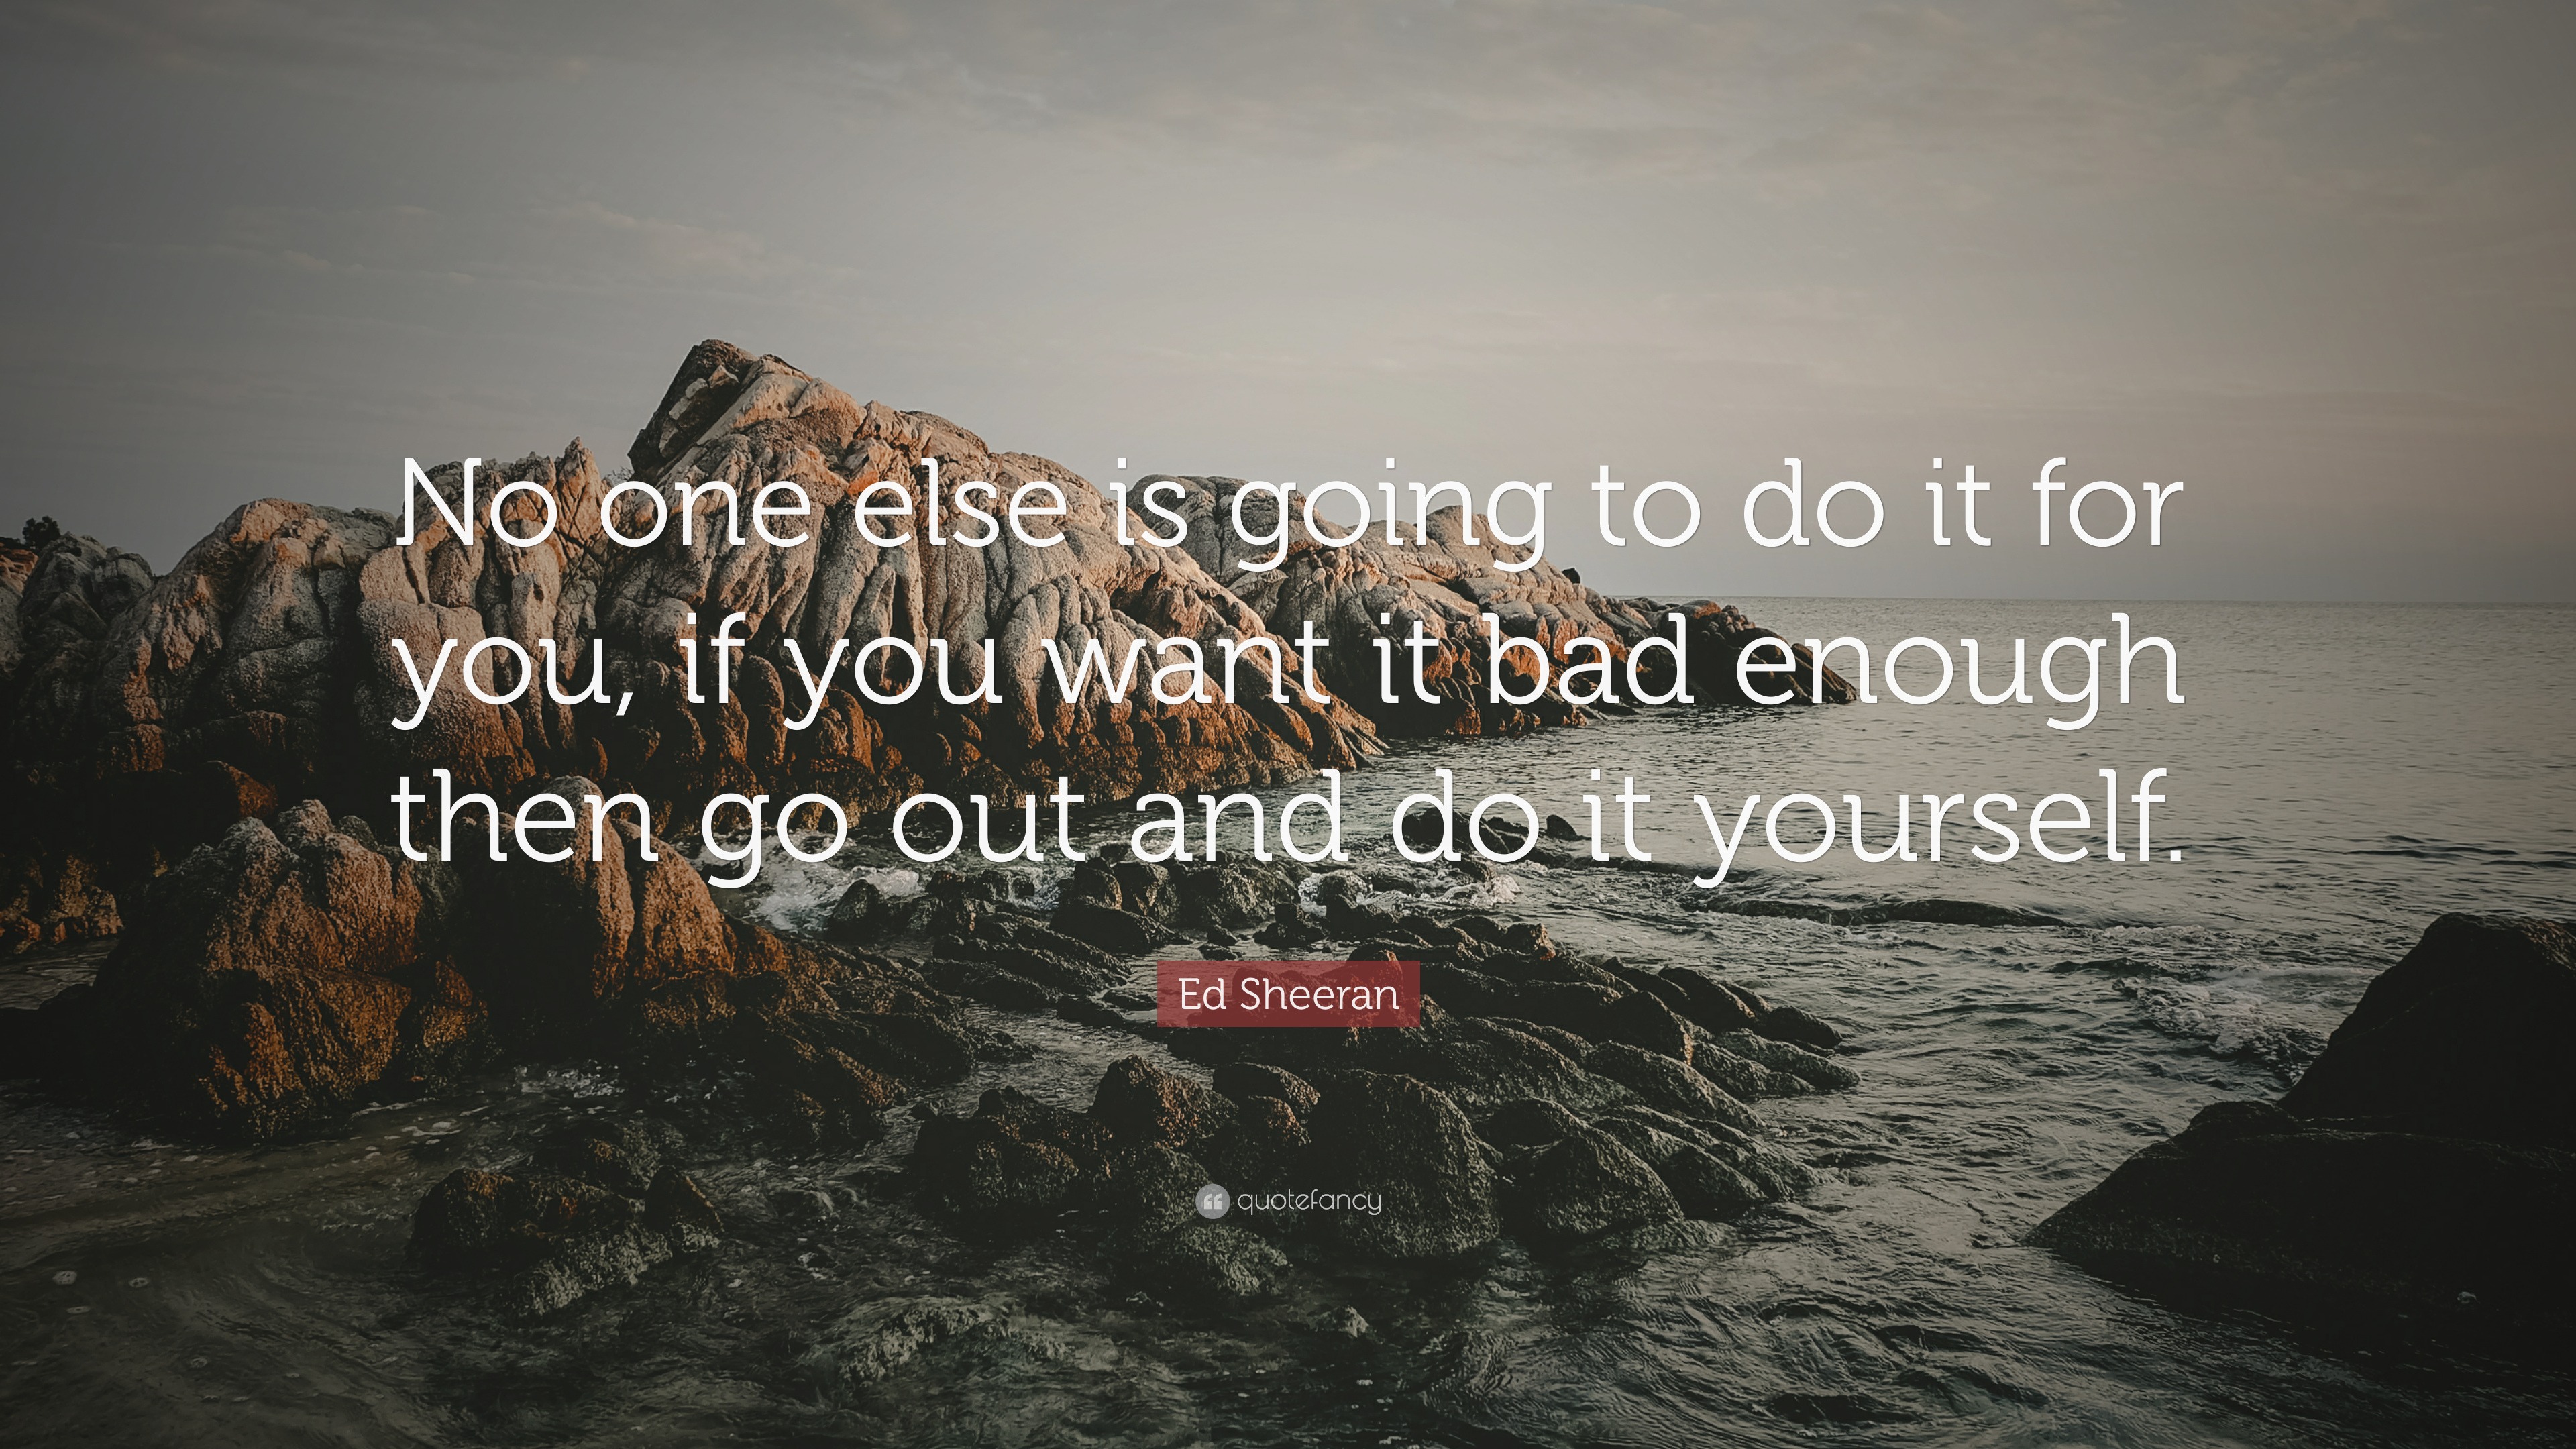 Ed Sheeran Quote: “No one else is going to do it for you, if you want ...